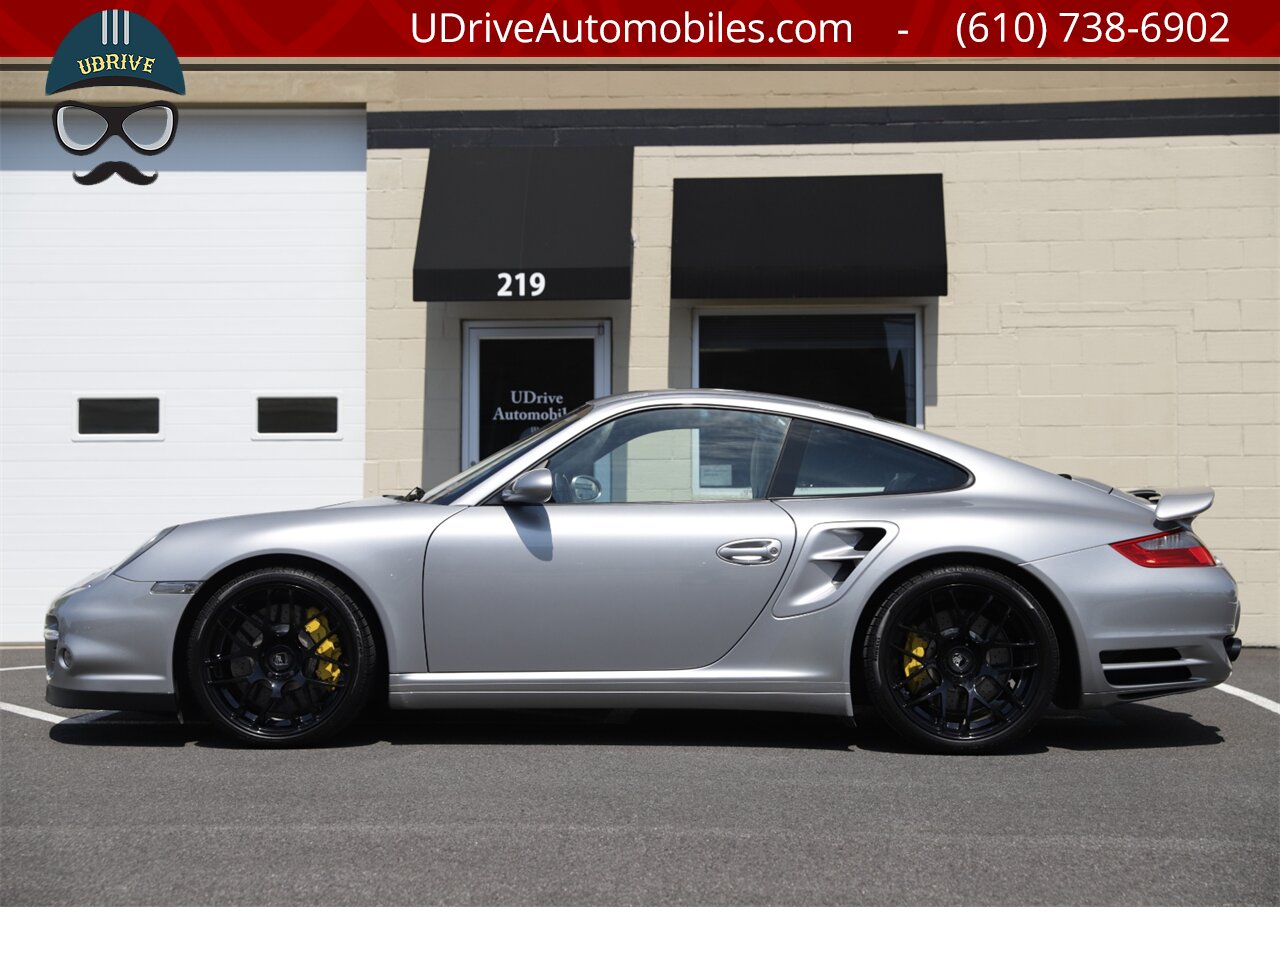 2008 Porsche 911 6 Speed Manual Turbo 997 PCCB's $149k MSRP   - Photo 7 - West Chester, PA 19382